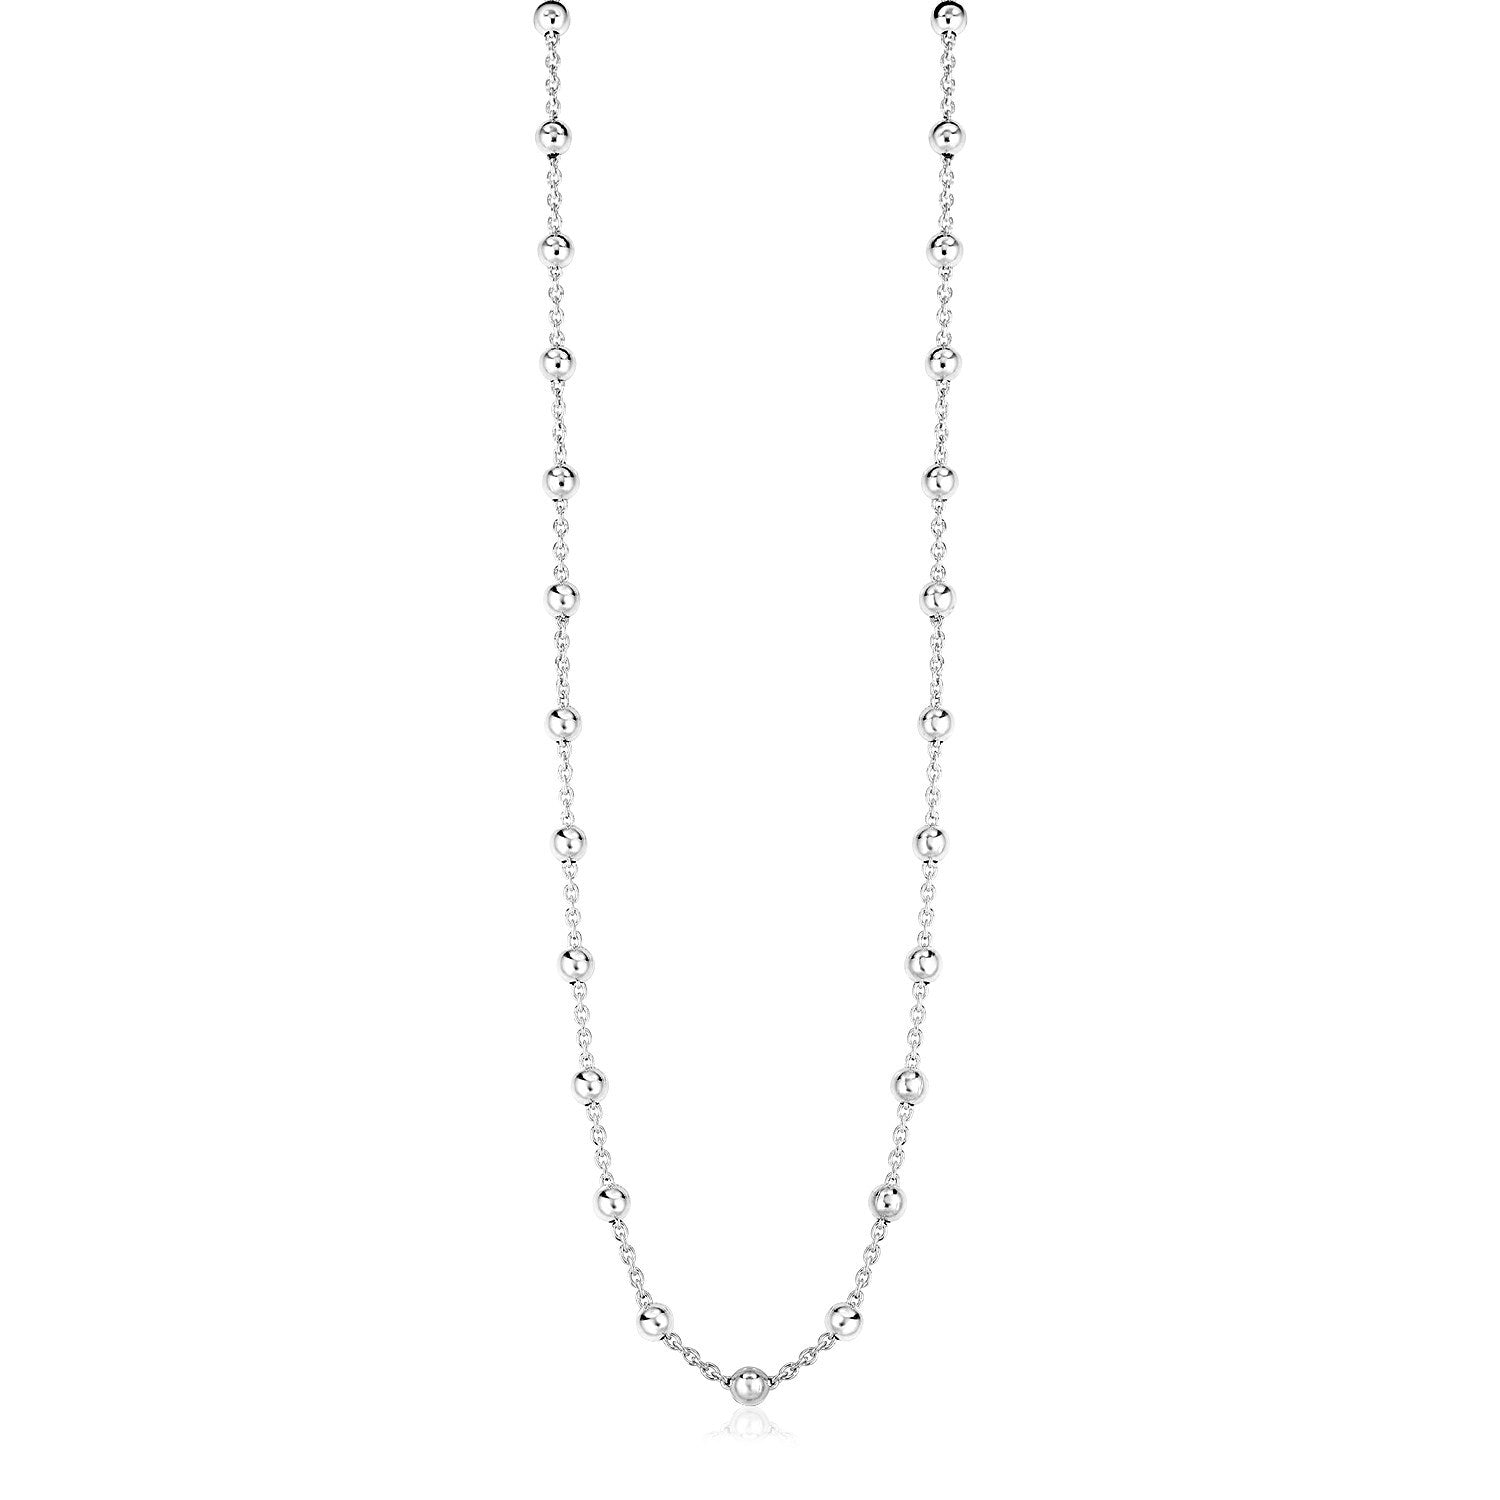 Sterling Silver Station Necklace with Polished Beads, size 24''